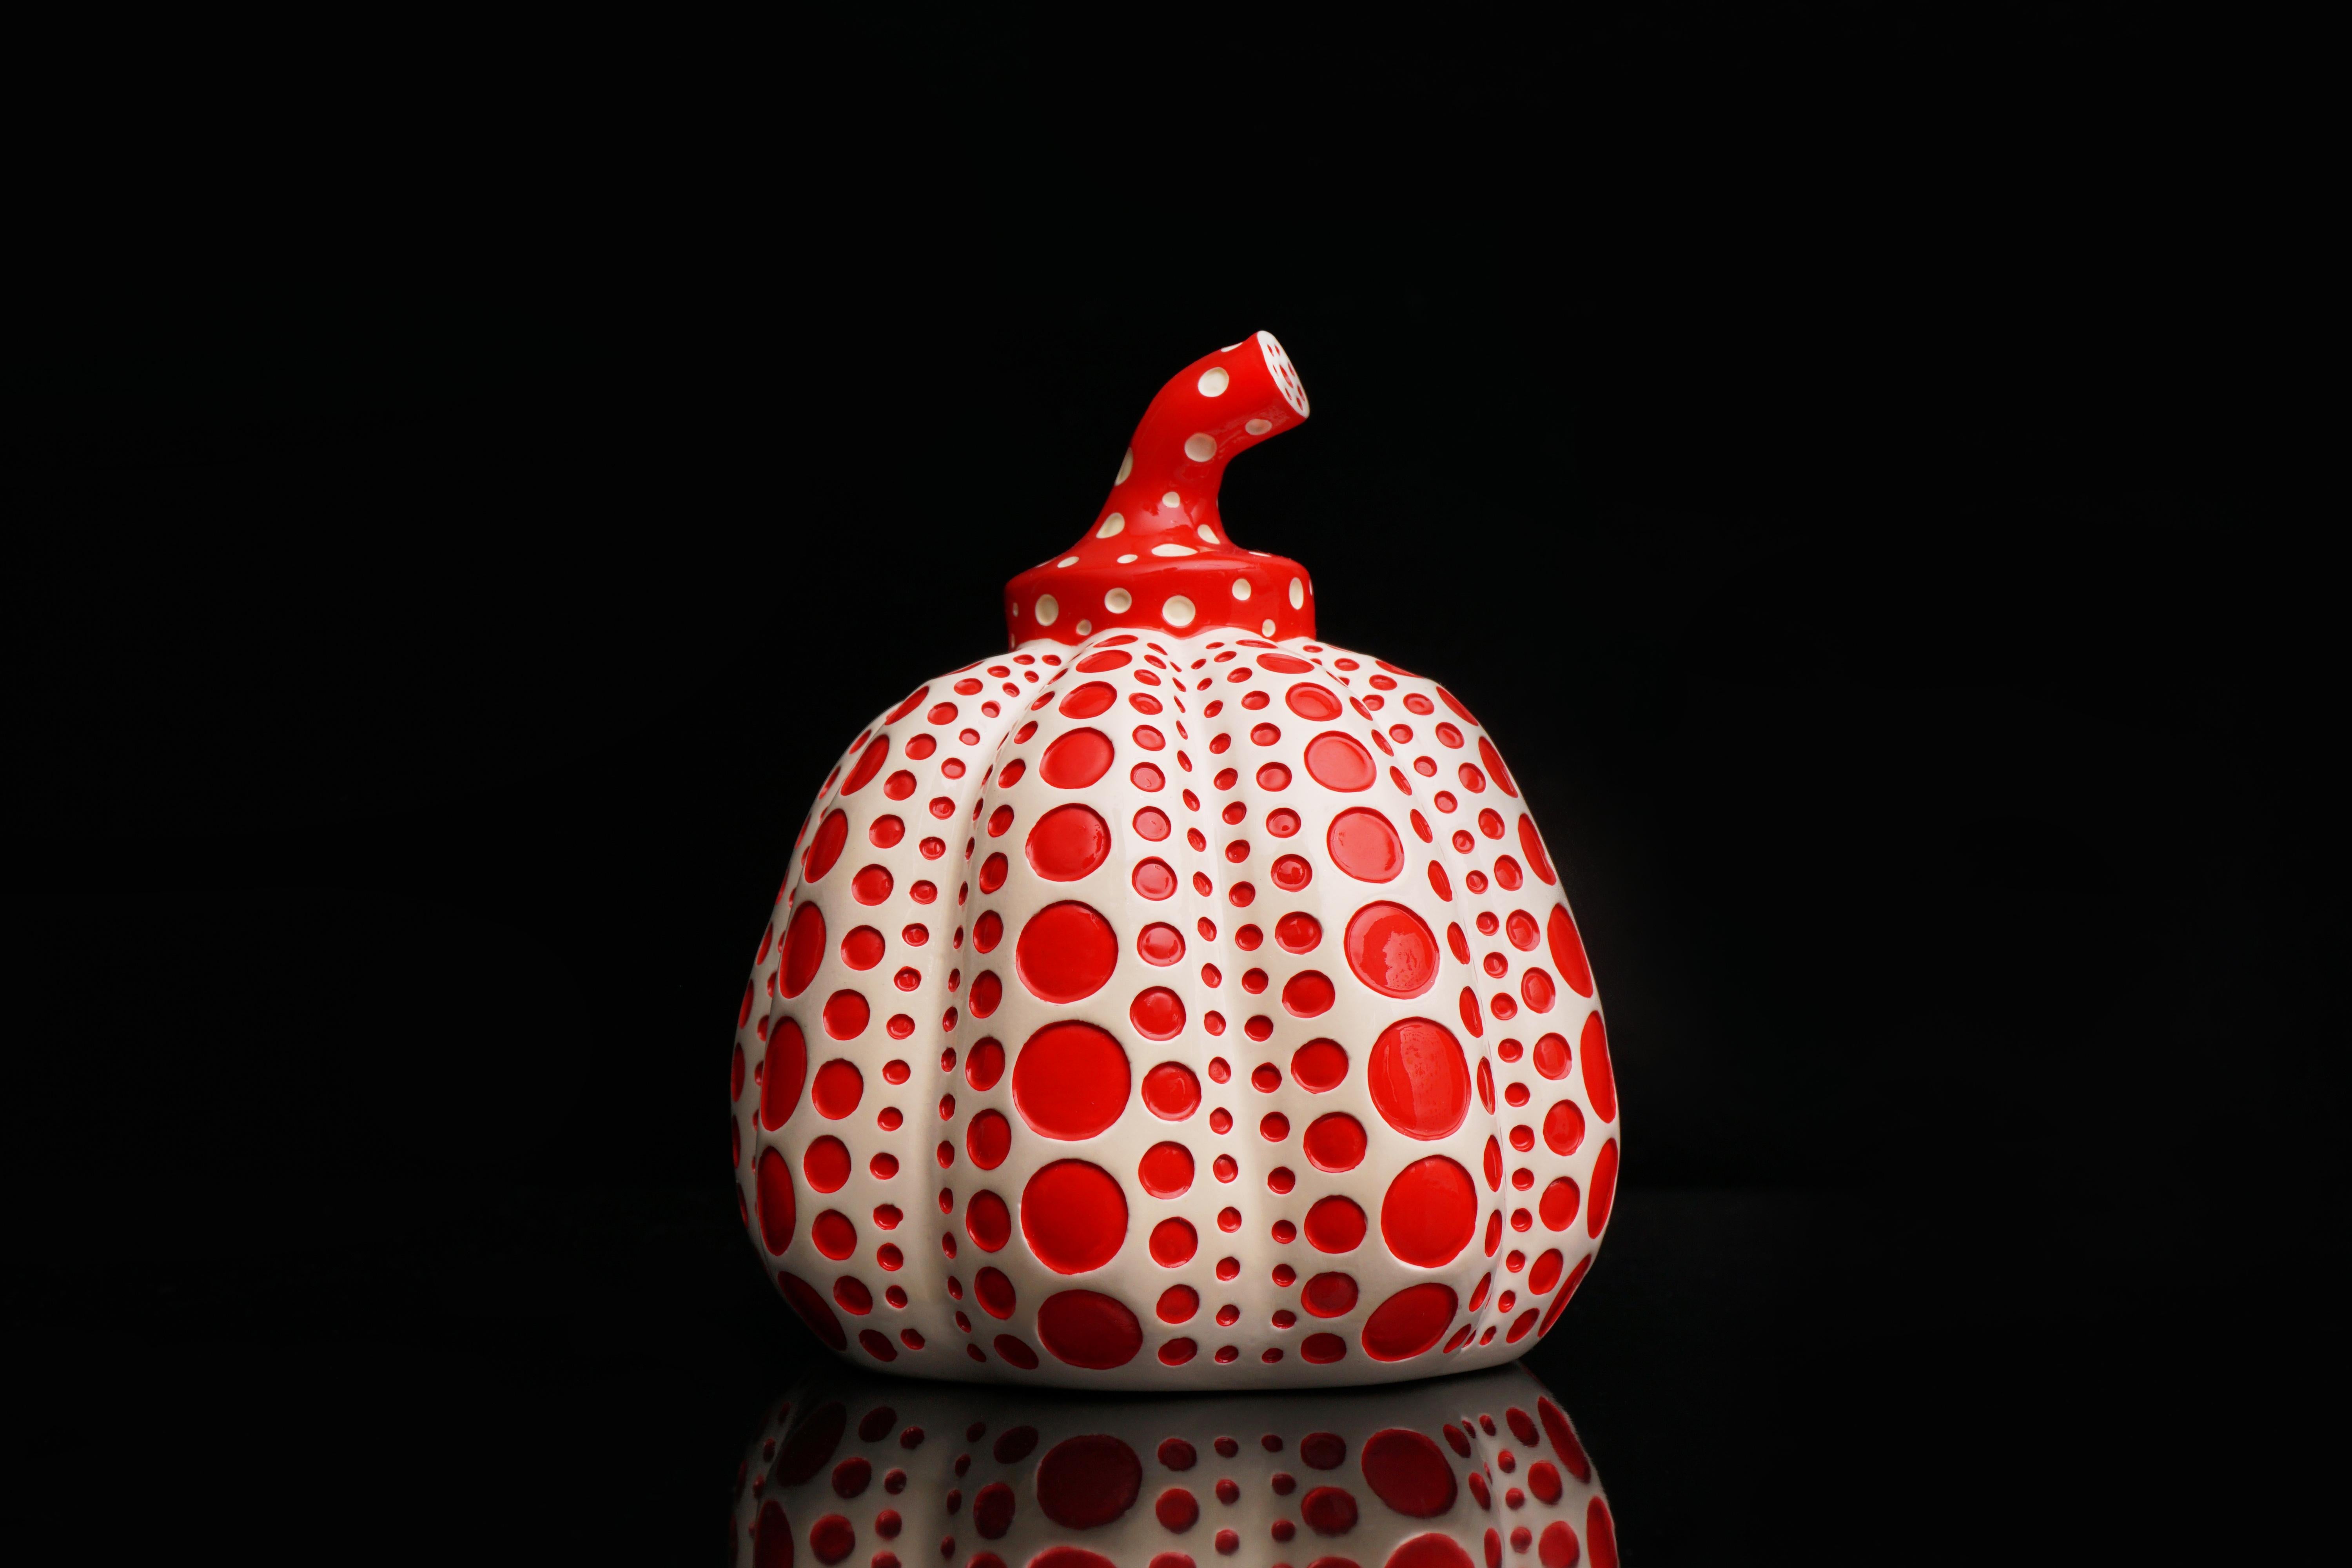 The ’Pumpkin'  sculpture is a polka-dotted painted lacquer resin collectible art object by the legendary contemporary Artist, Yayoi Kusama. Published by Benesse Holdings, Inc., Naoshima, Japan. Created in 2016, the polka-dot pumpkin series is a